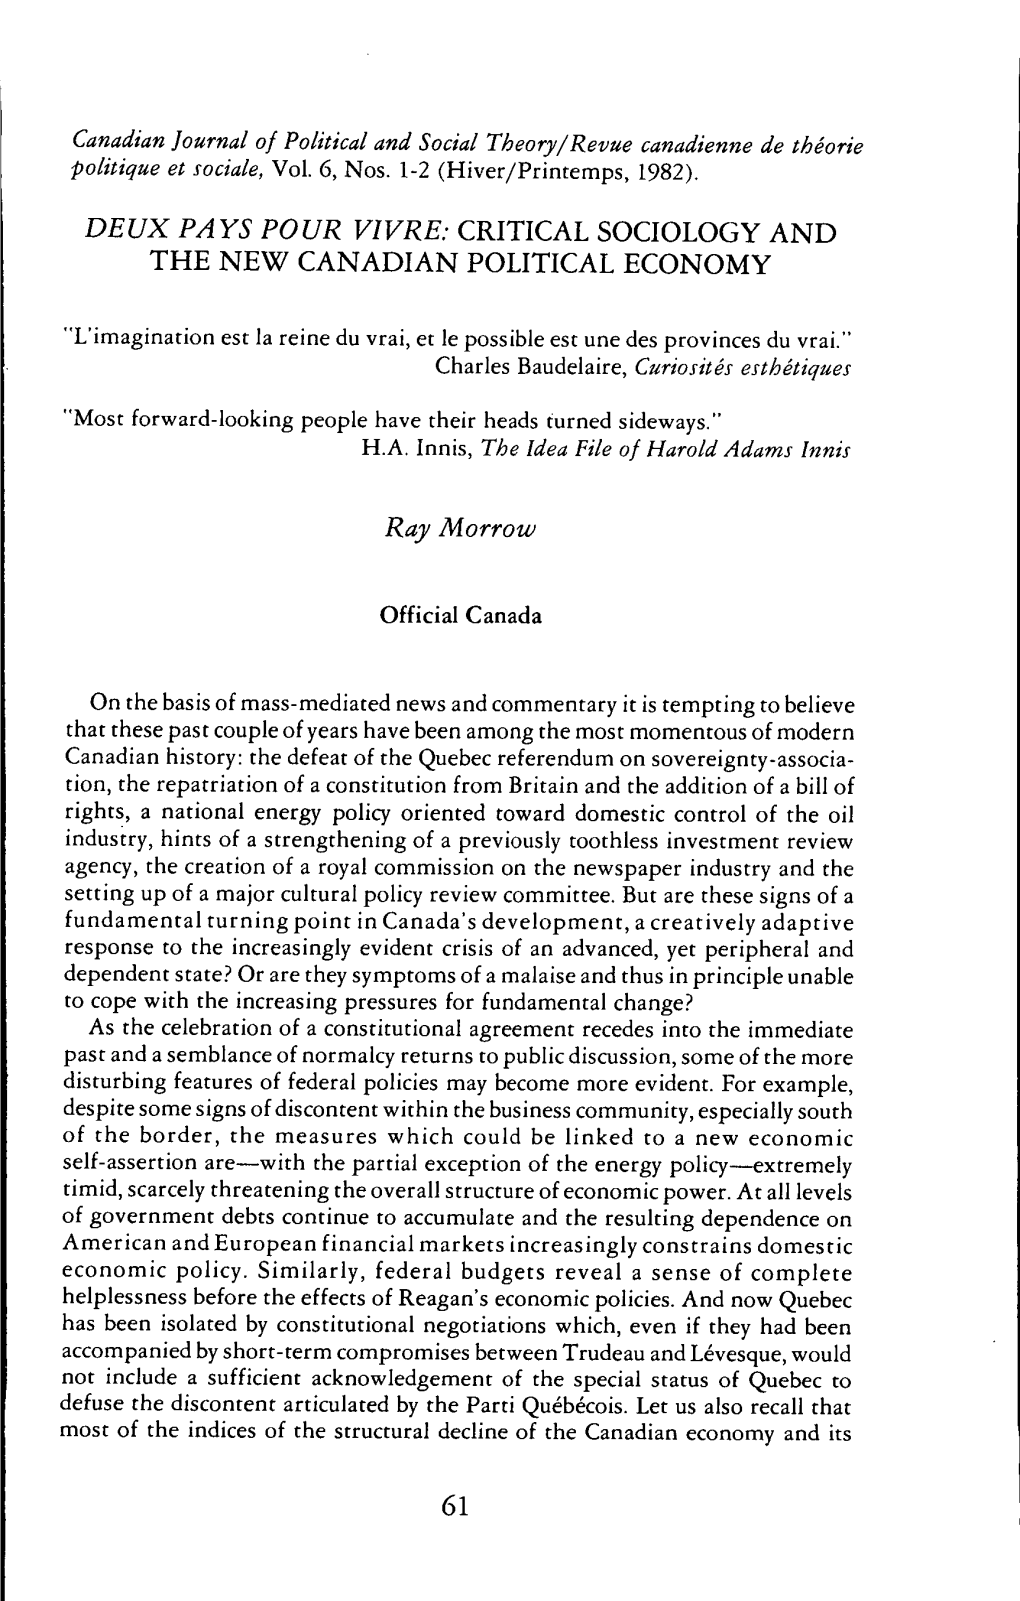 Critical Sociology and the New Canadian Political Economy